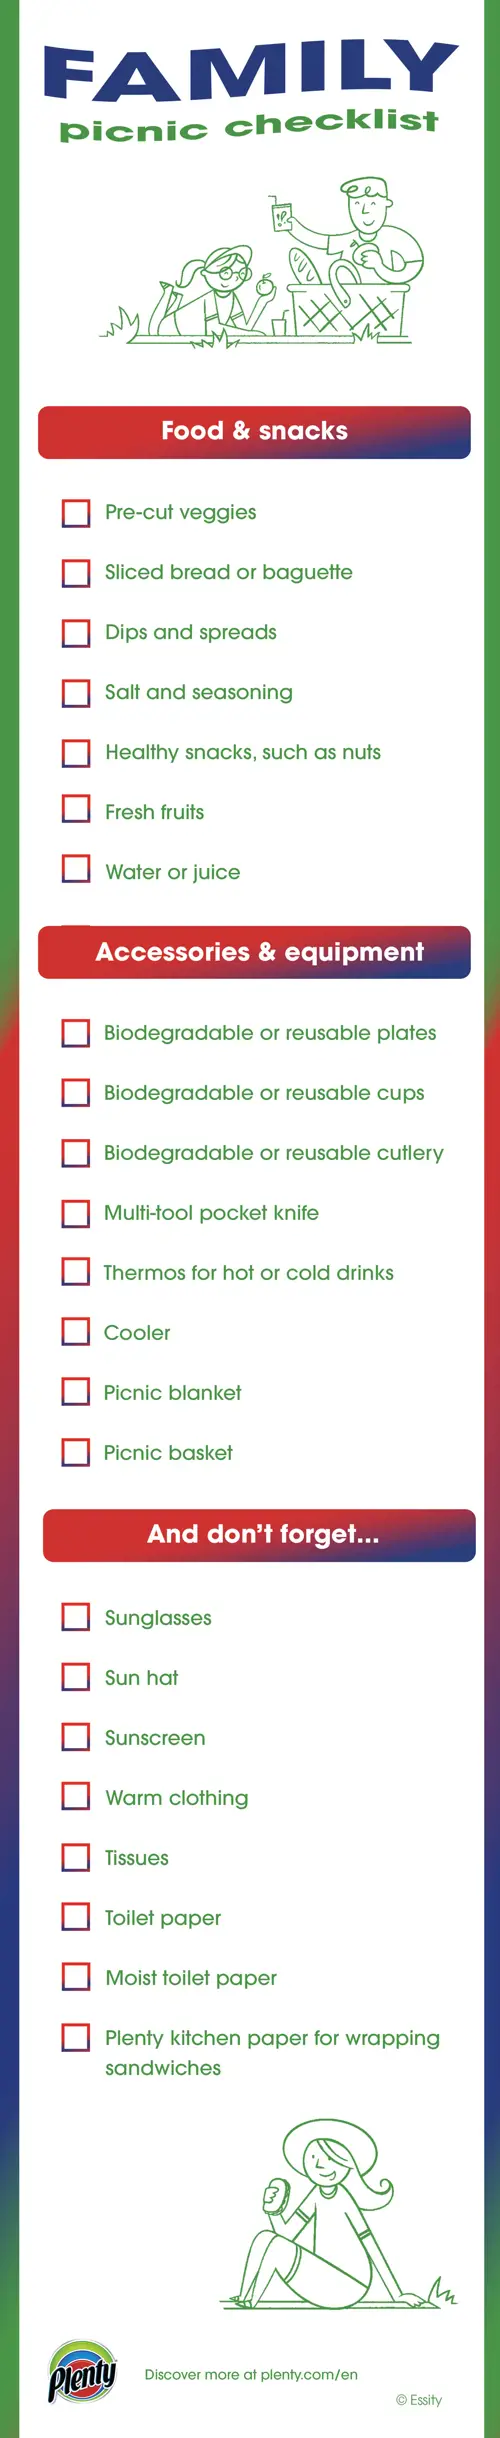 The picnic checklist: what to bring with you